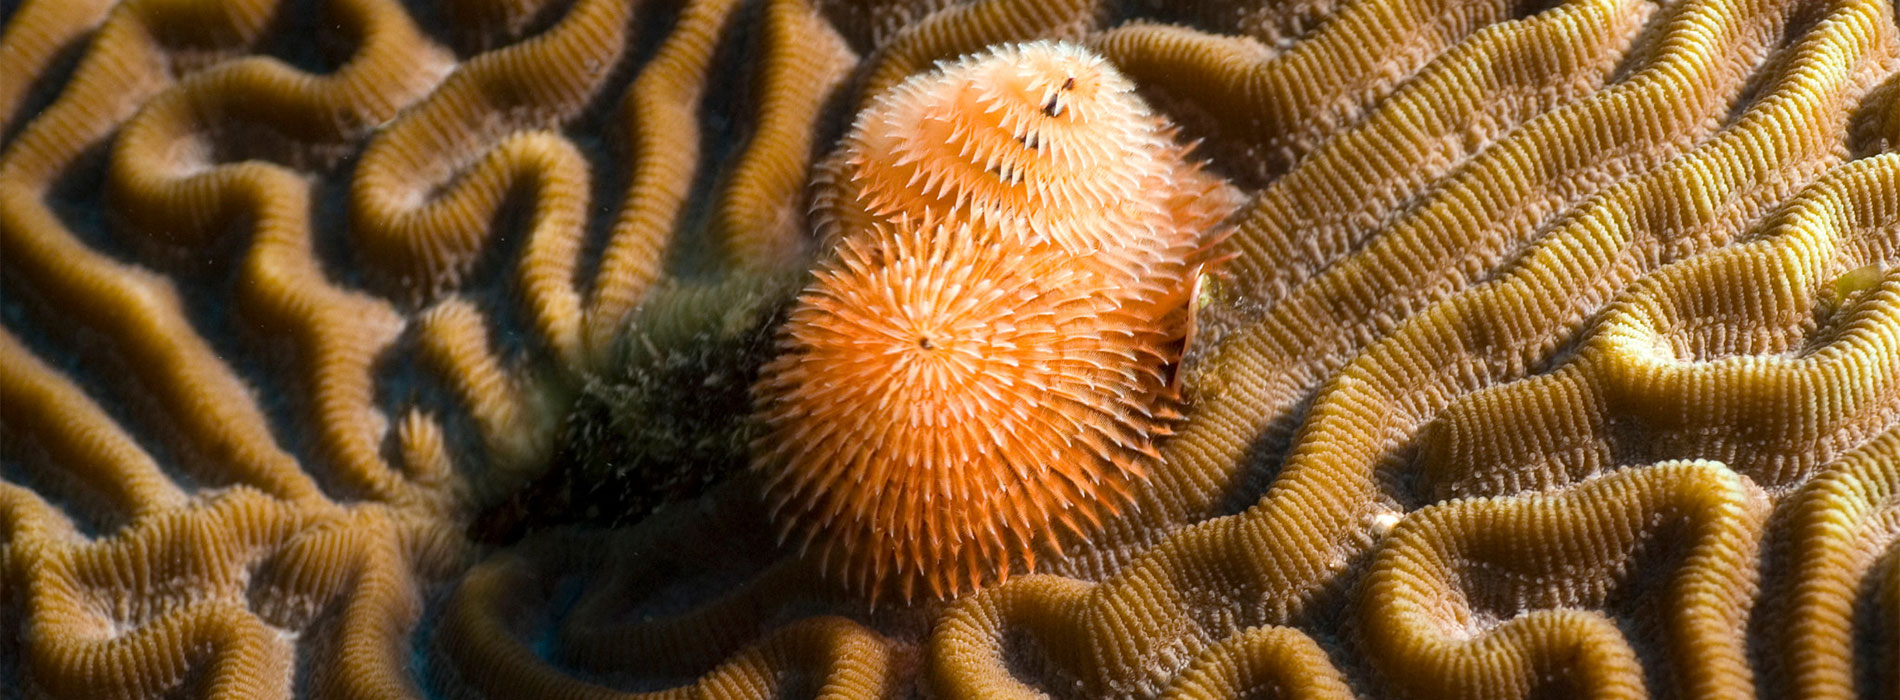 Brain coral with Christmas tree worm